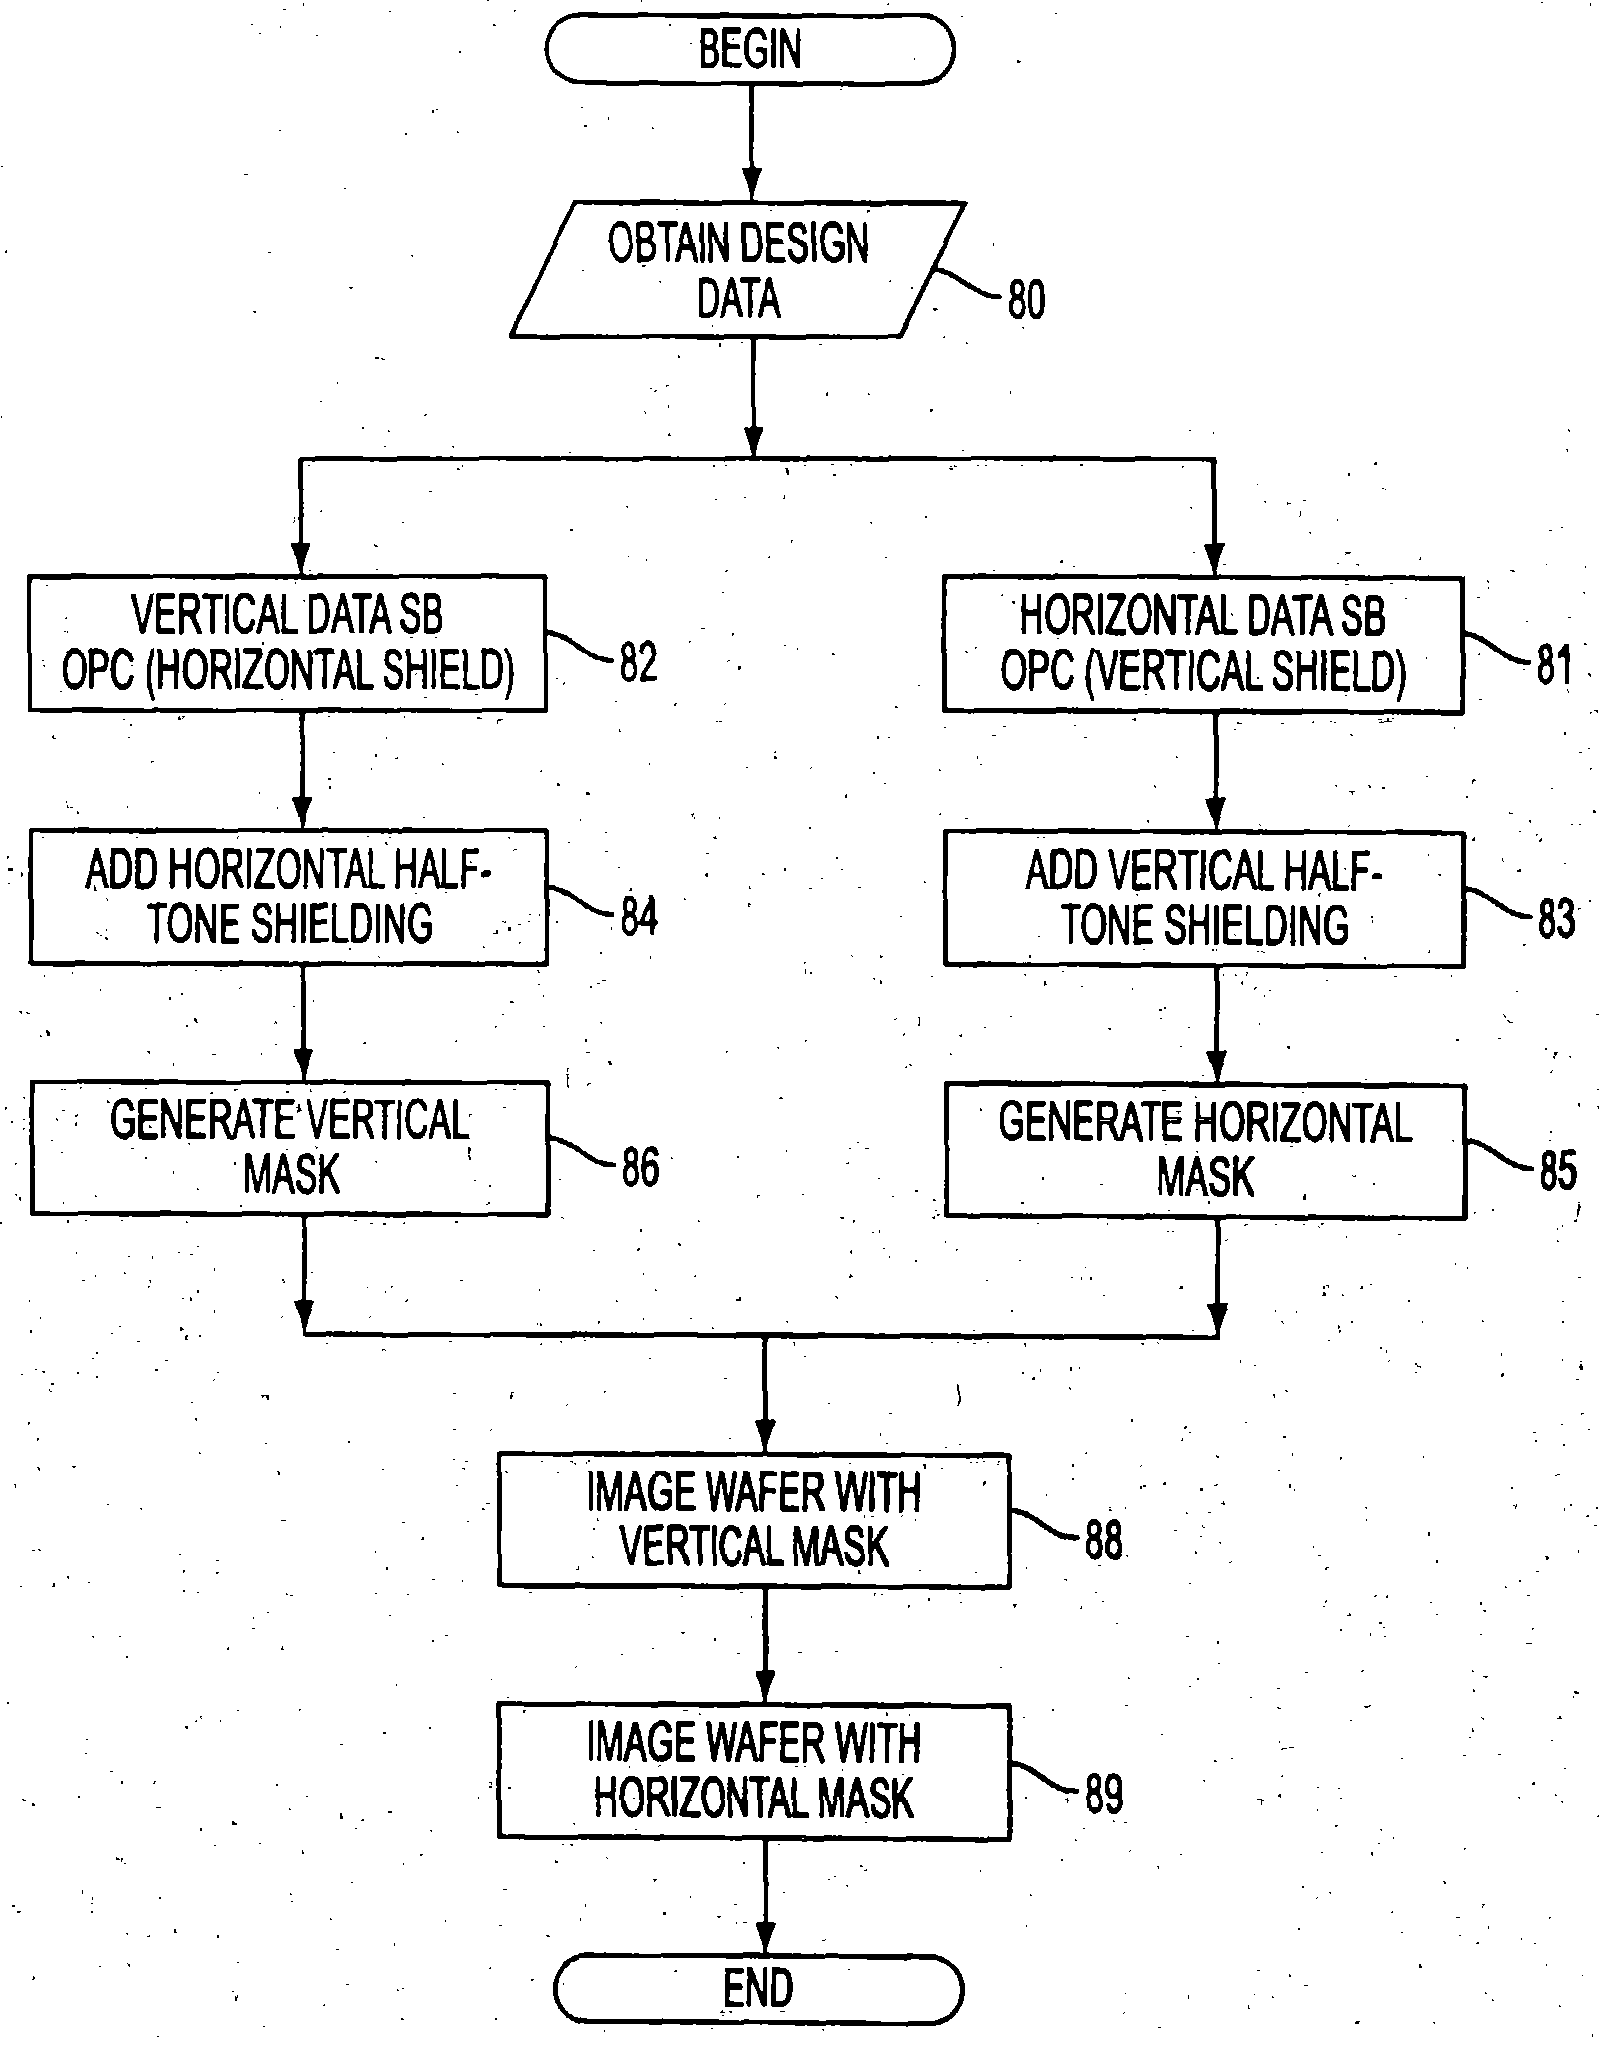 Orientation dependent shielding for use with dipole illumination techniques